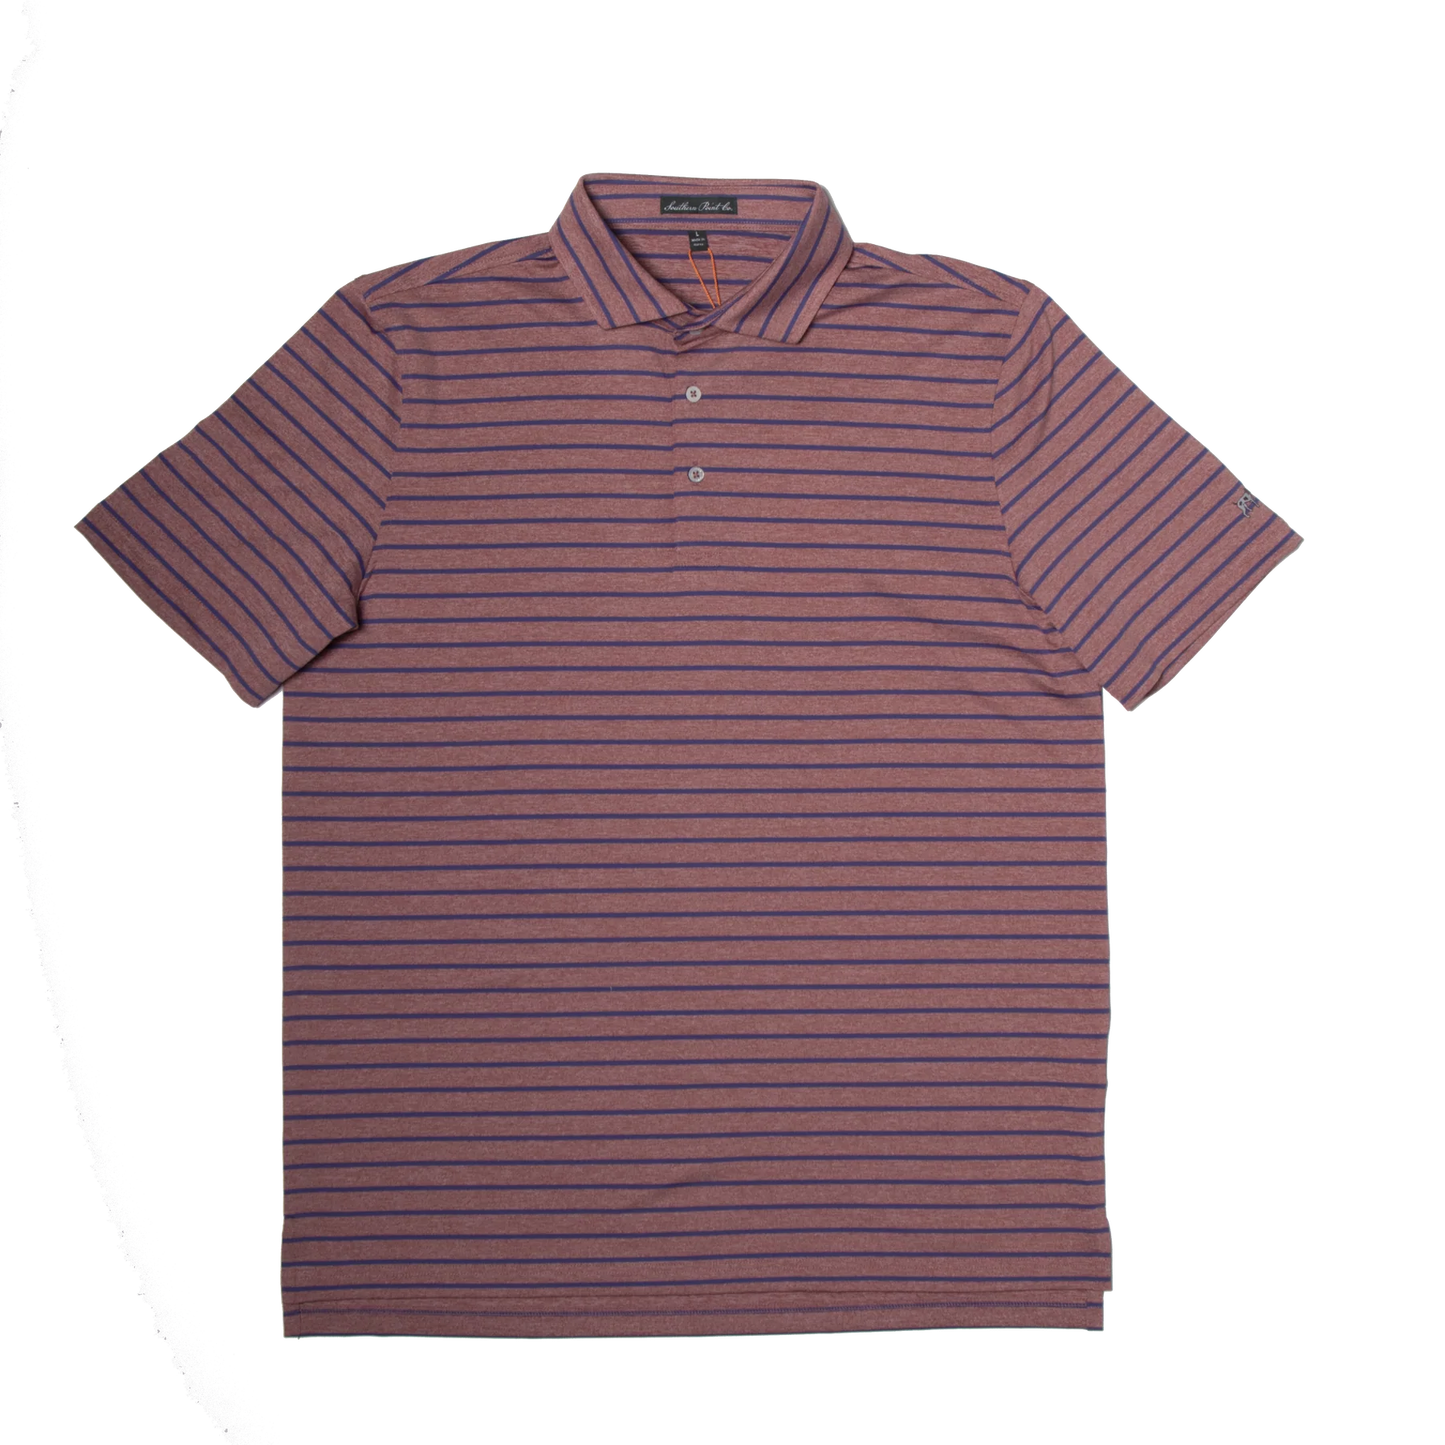 Southern Point Co. Performance Polo, Red Navy Stripe